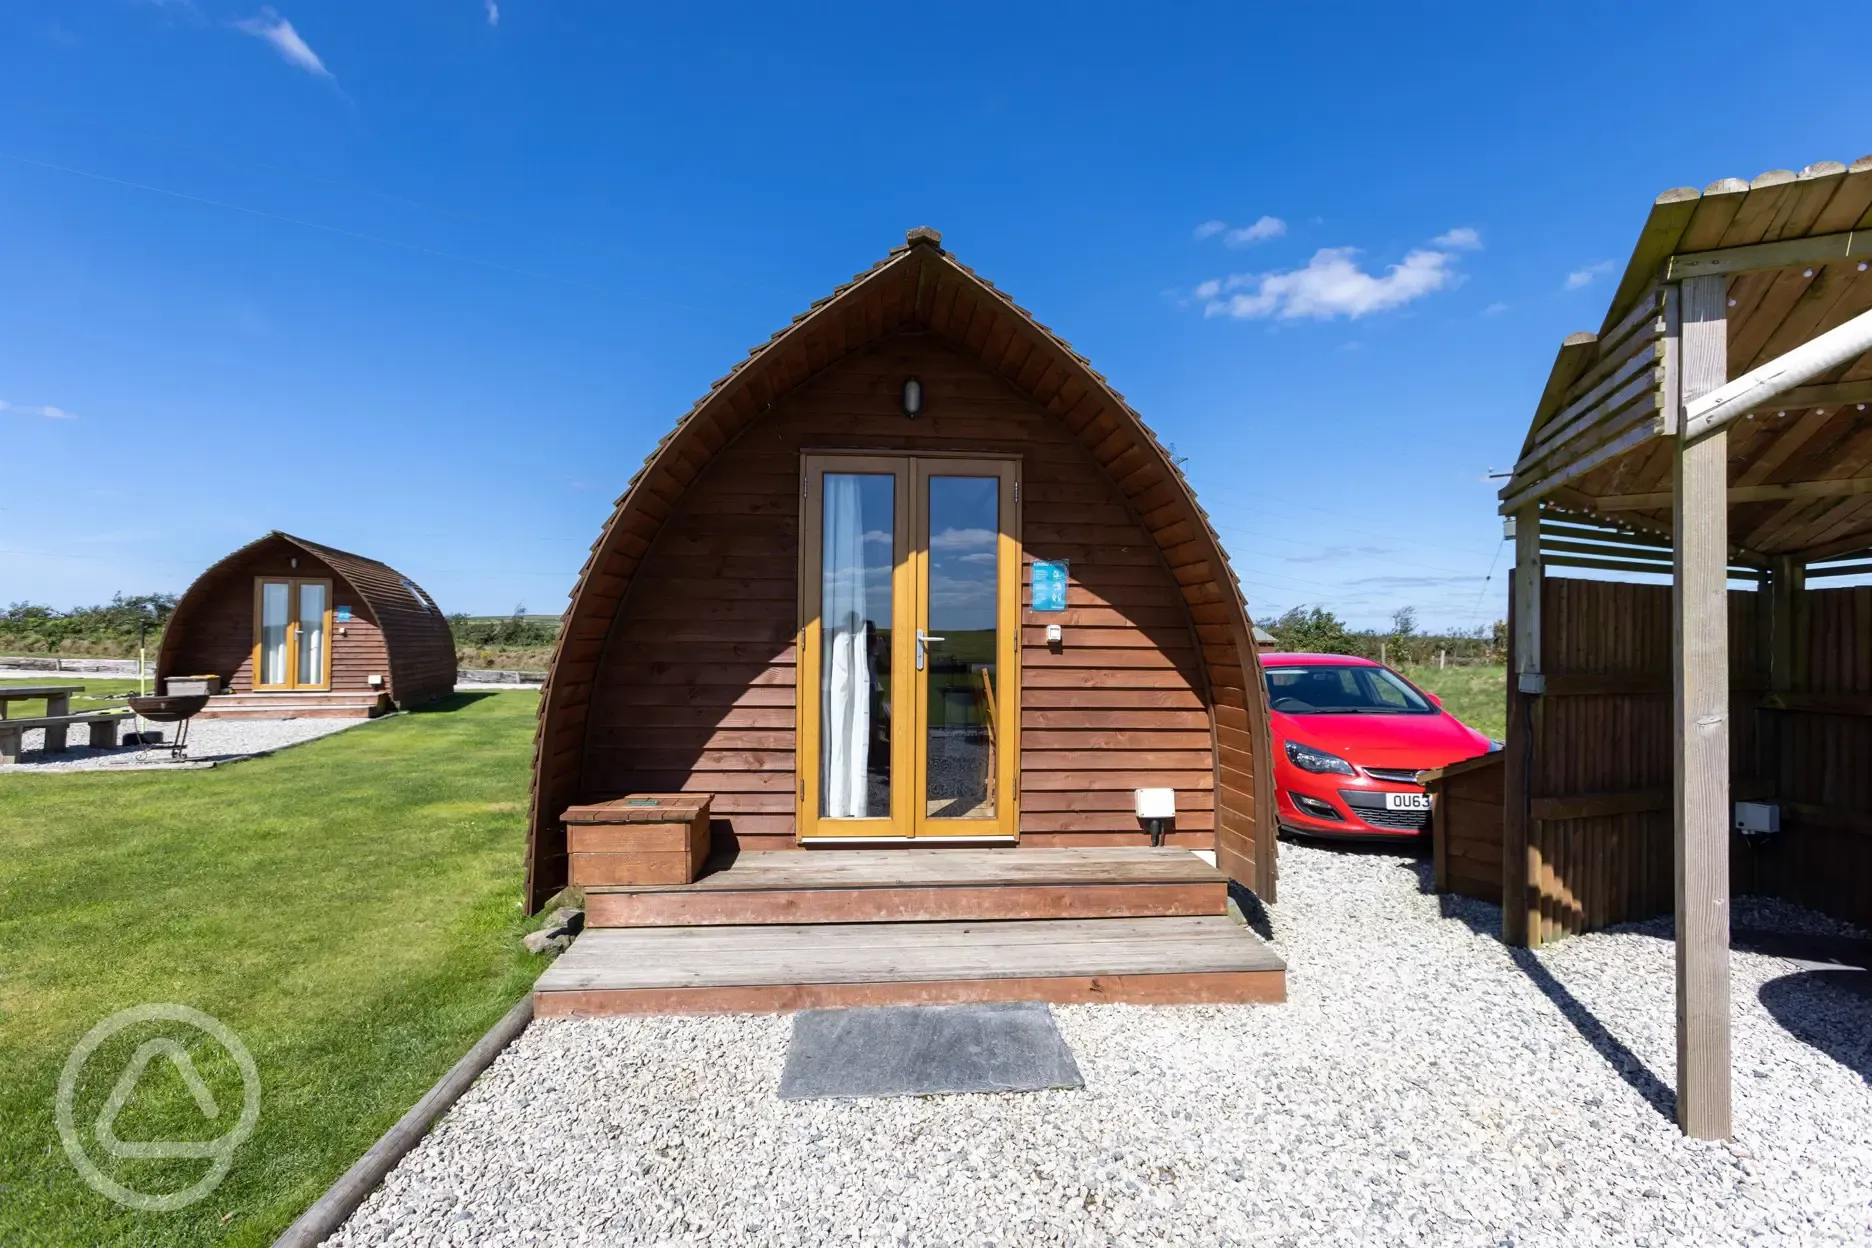 Wigwam pods with optional hot tubs